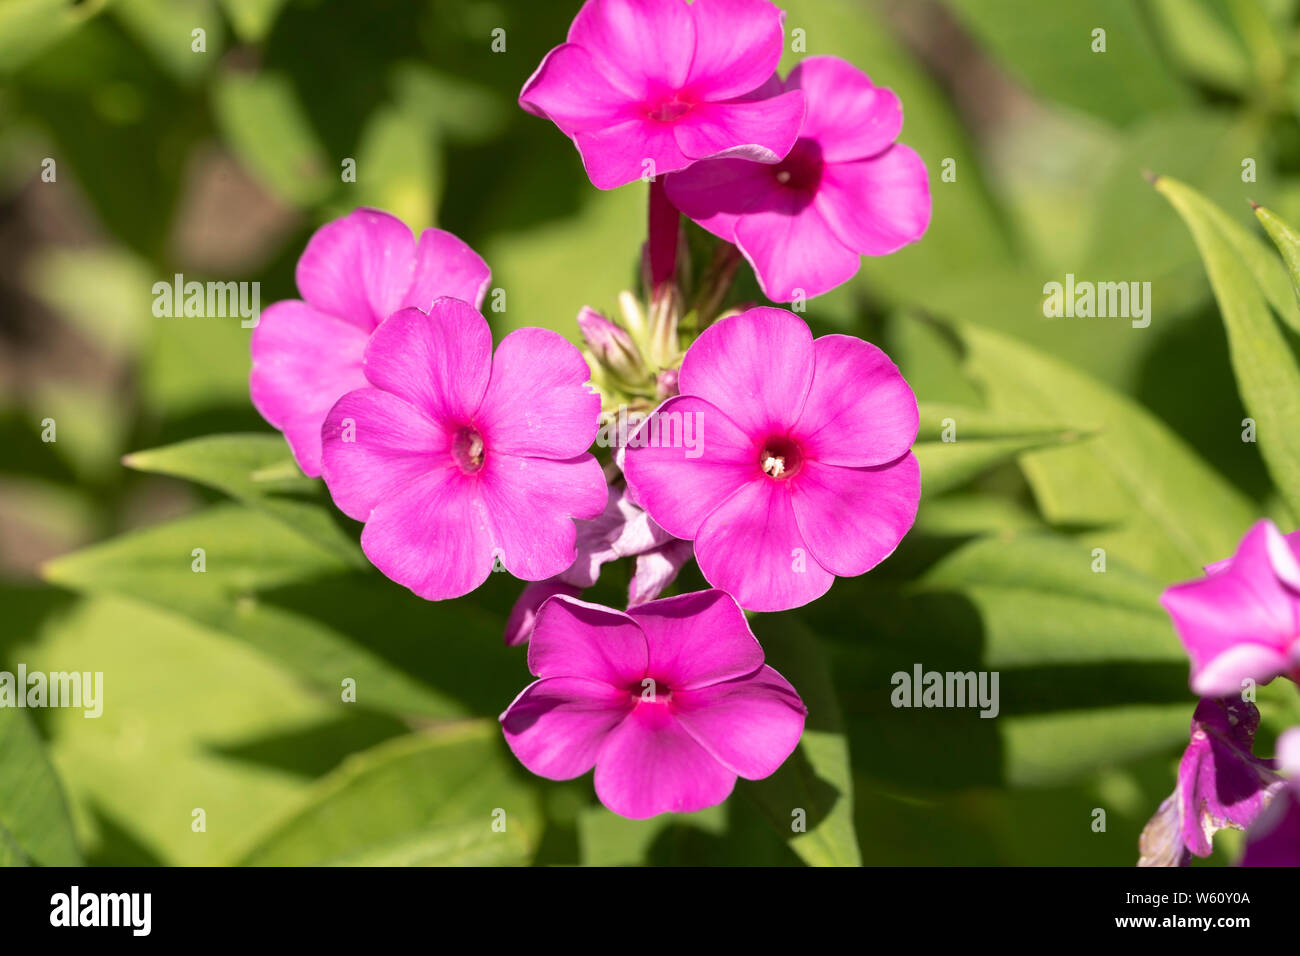 Magenta coloured flowers of Phlox paniculata Younique Cerise (also known as Garden Phlox) flowering in July in Lower Austria, Europe Stock Photo